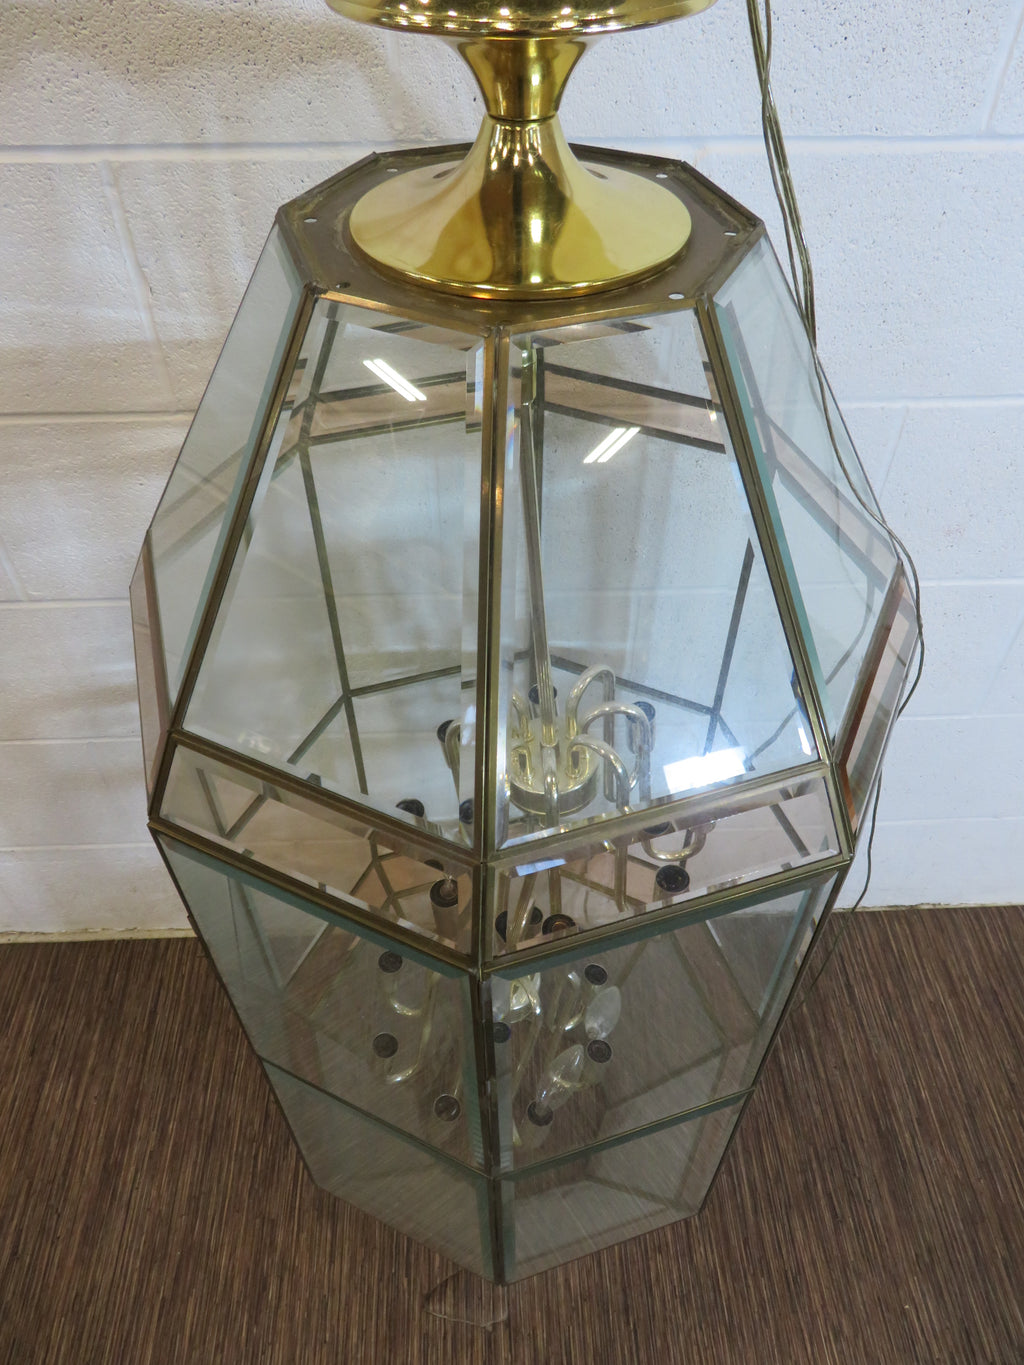 16-Light Chandelier with Glass Panes